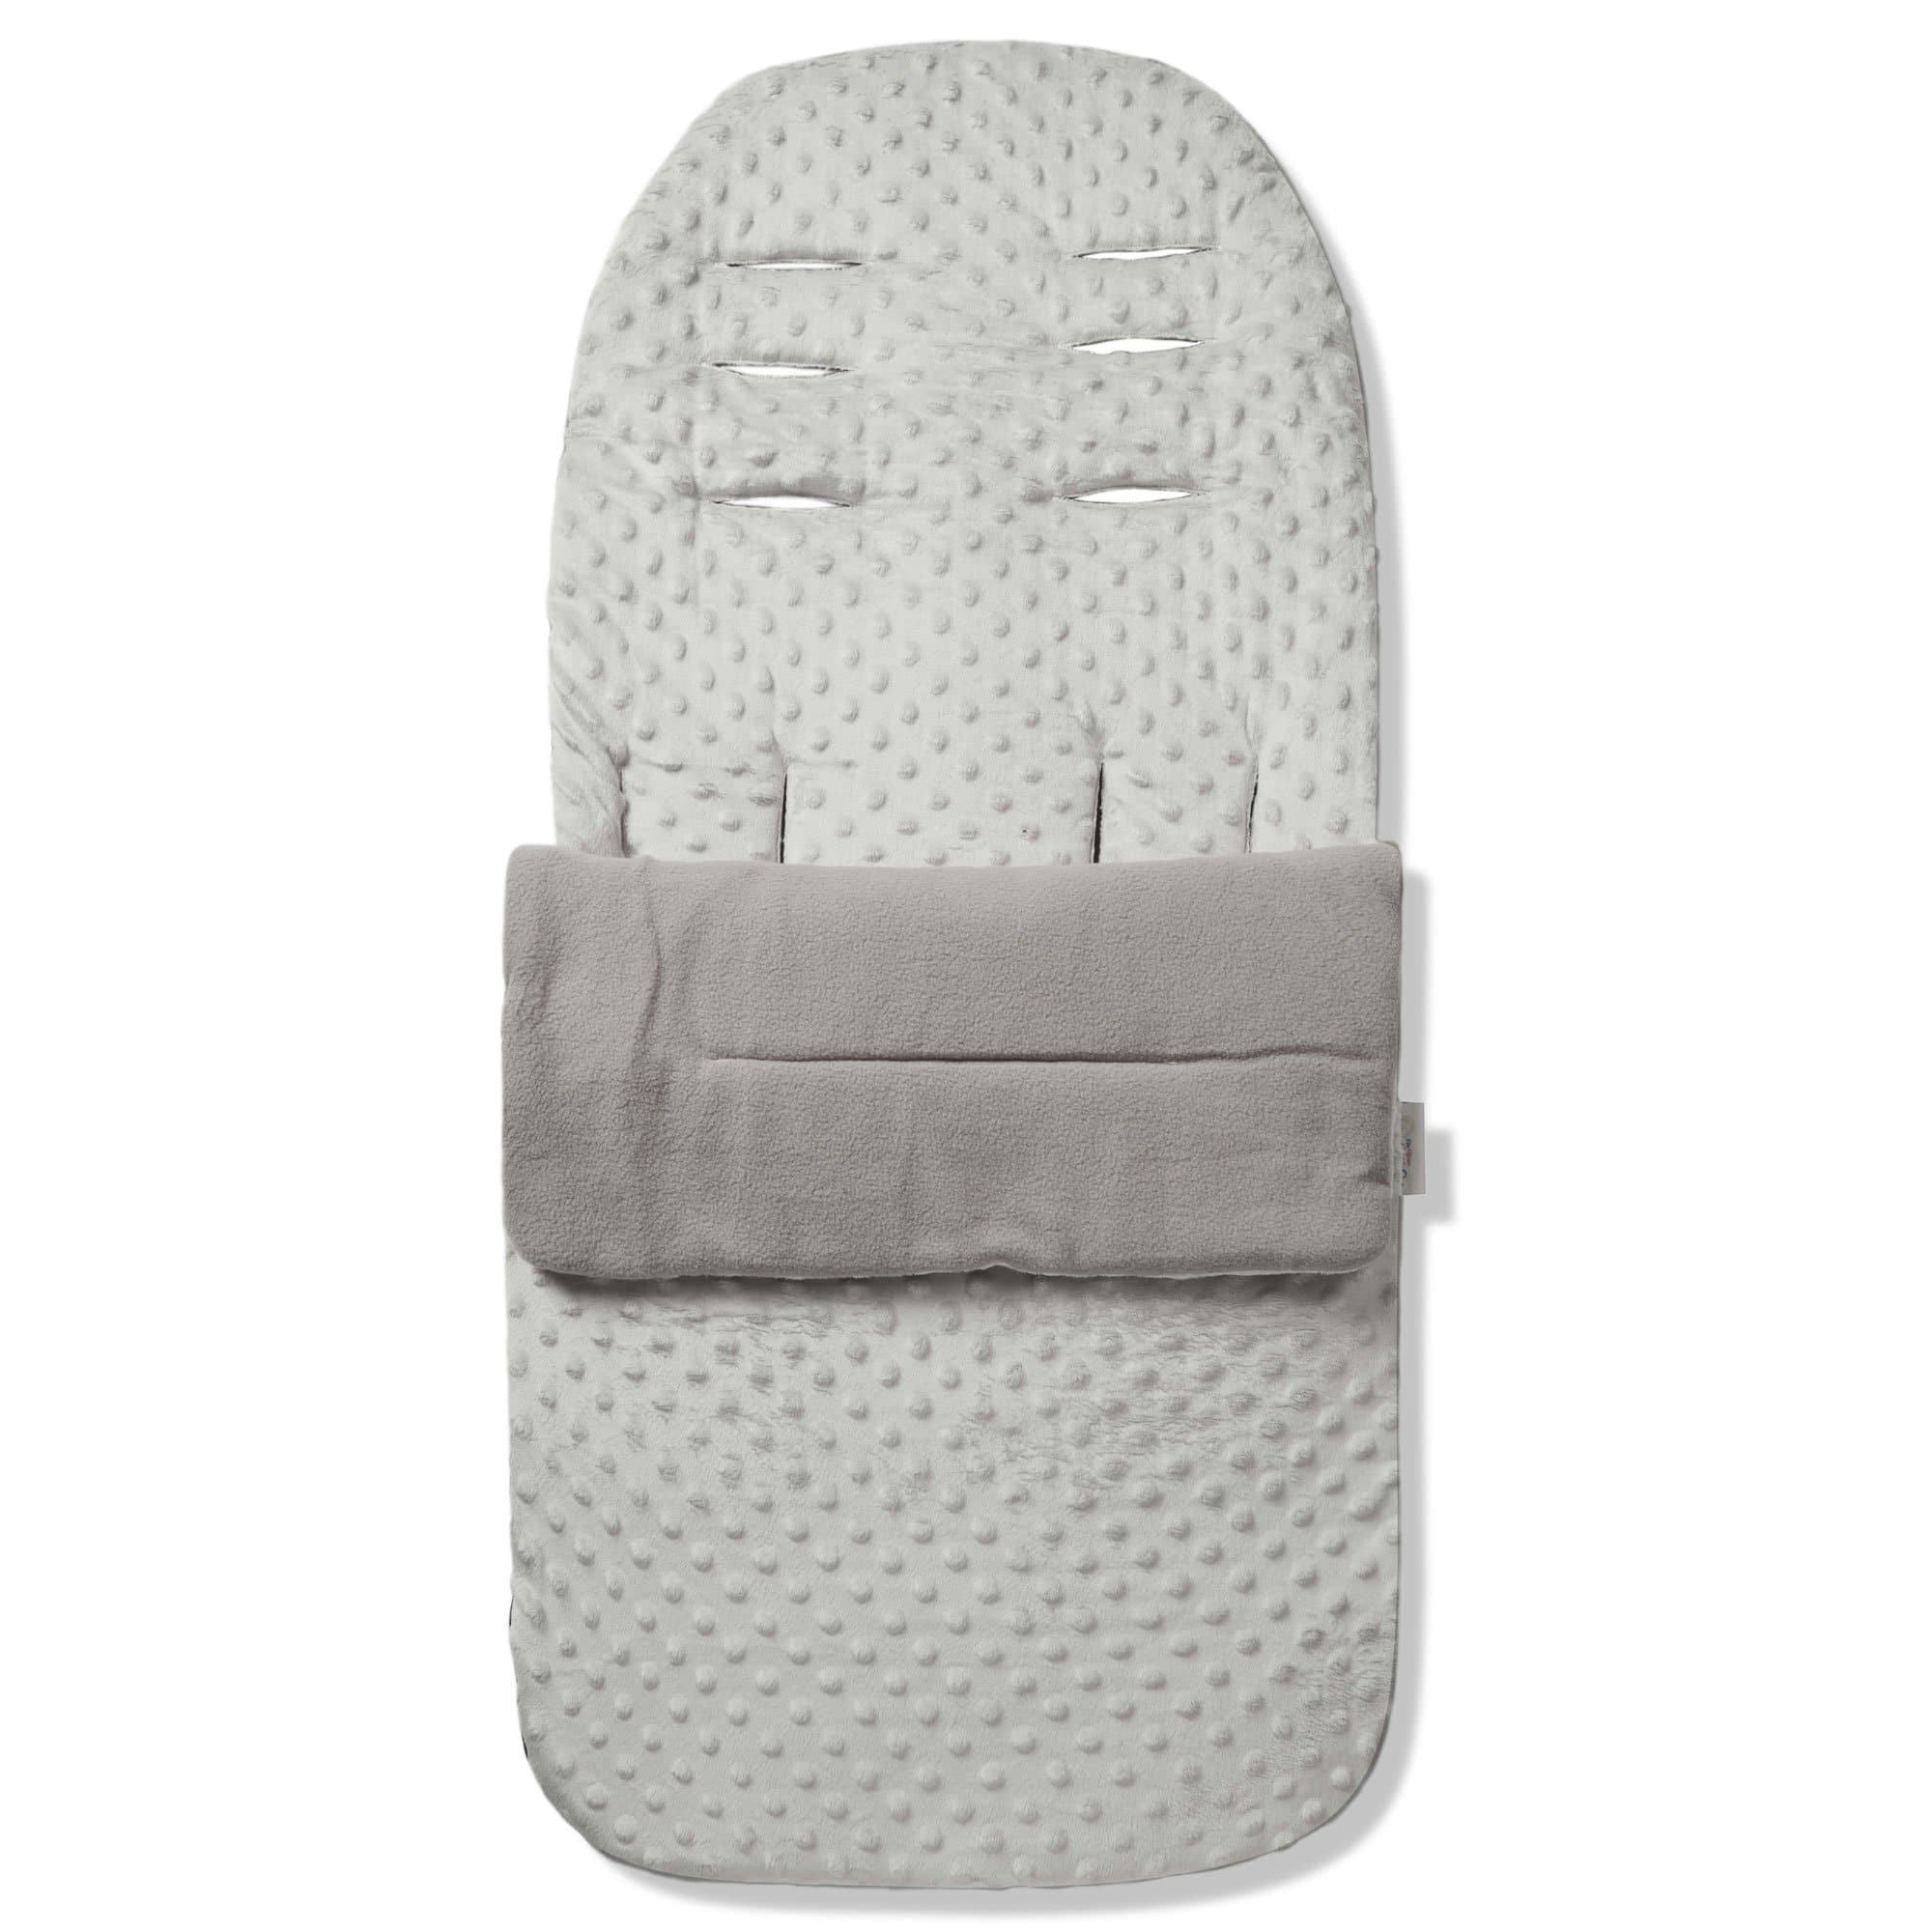 Dimple Footmuff / Cosy Toes Compatible with Chicco - Grey / Fits All Models | For Your Little One